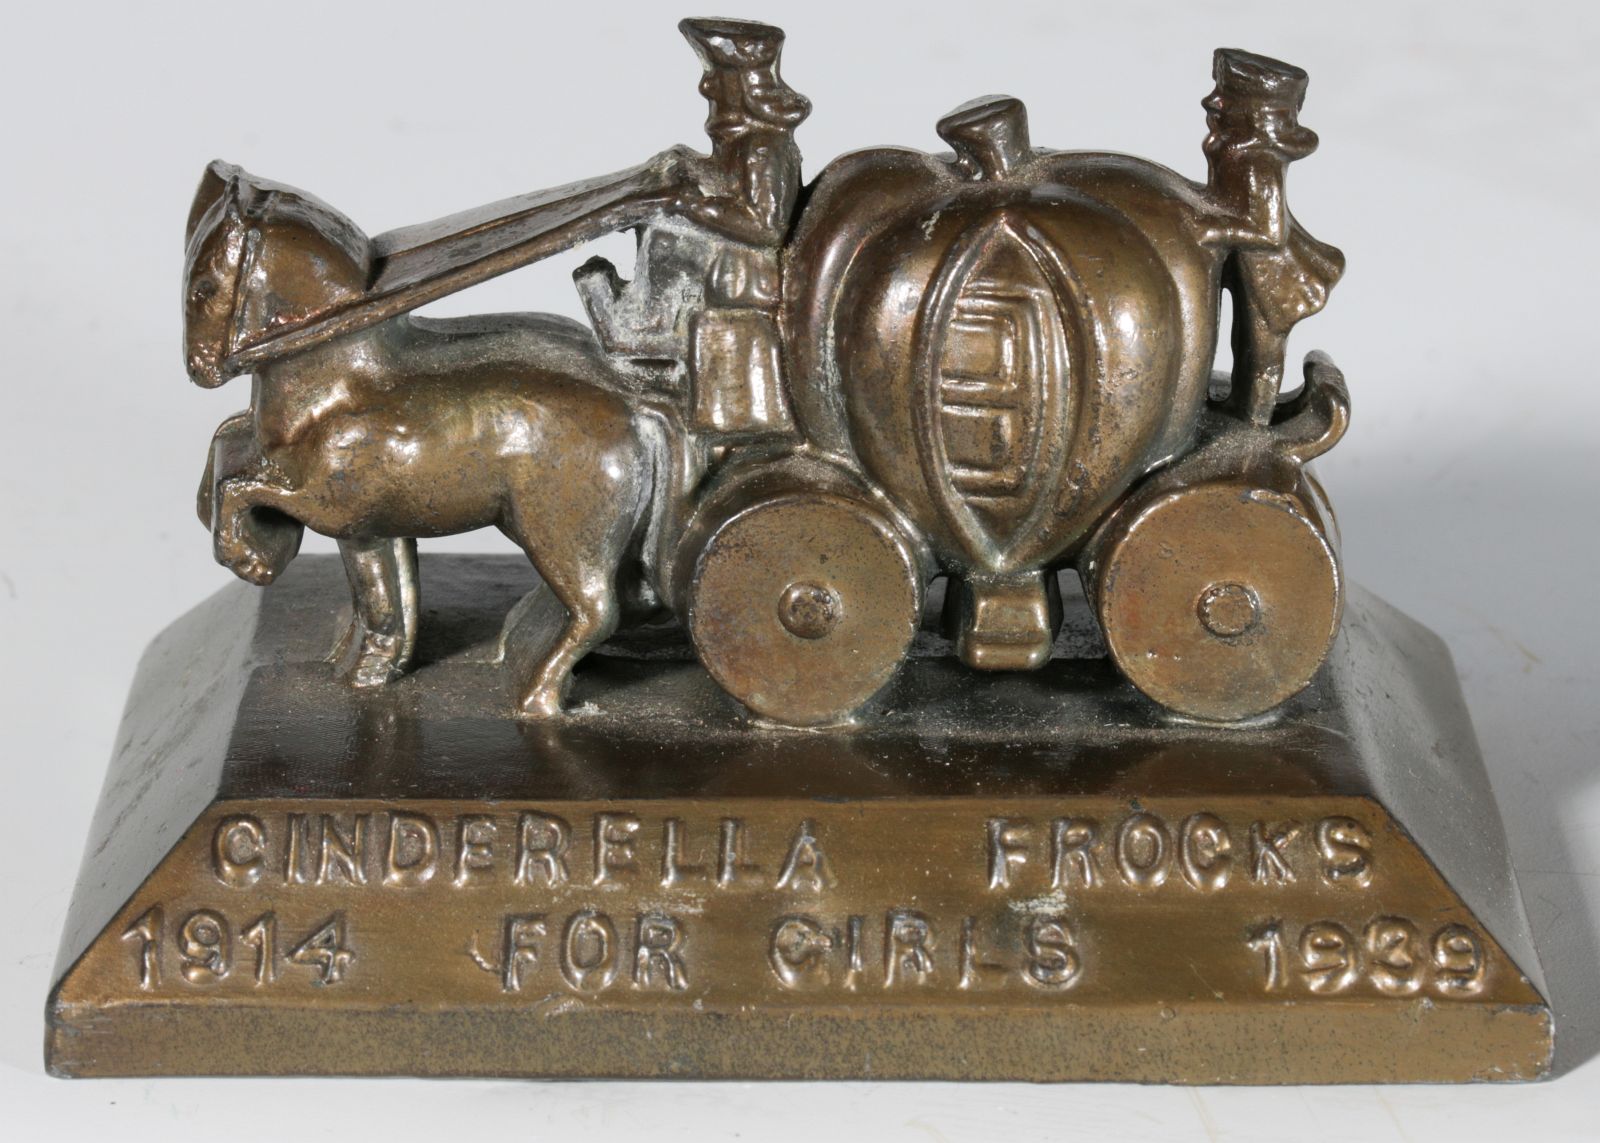 A 1939 'CINDERELLA FROCKS' ADVERTISING PAPERWEIGHT